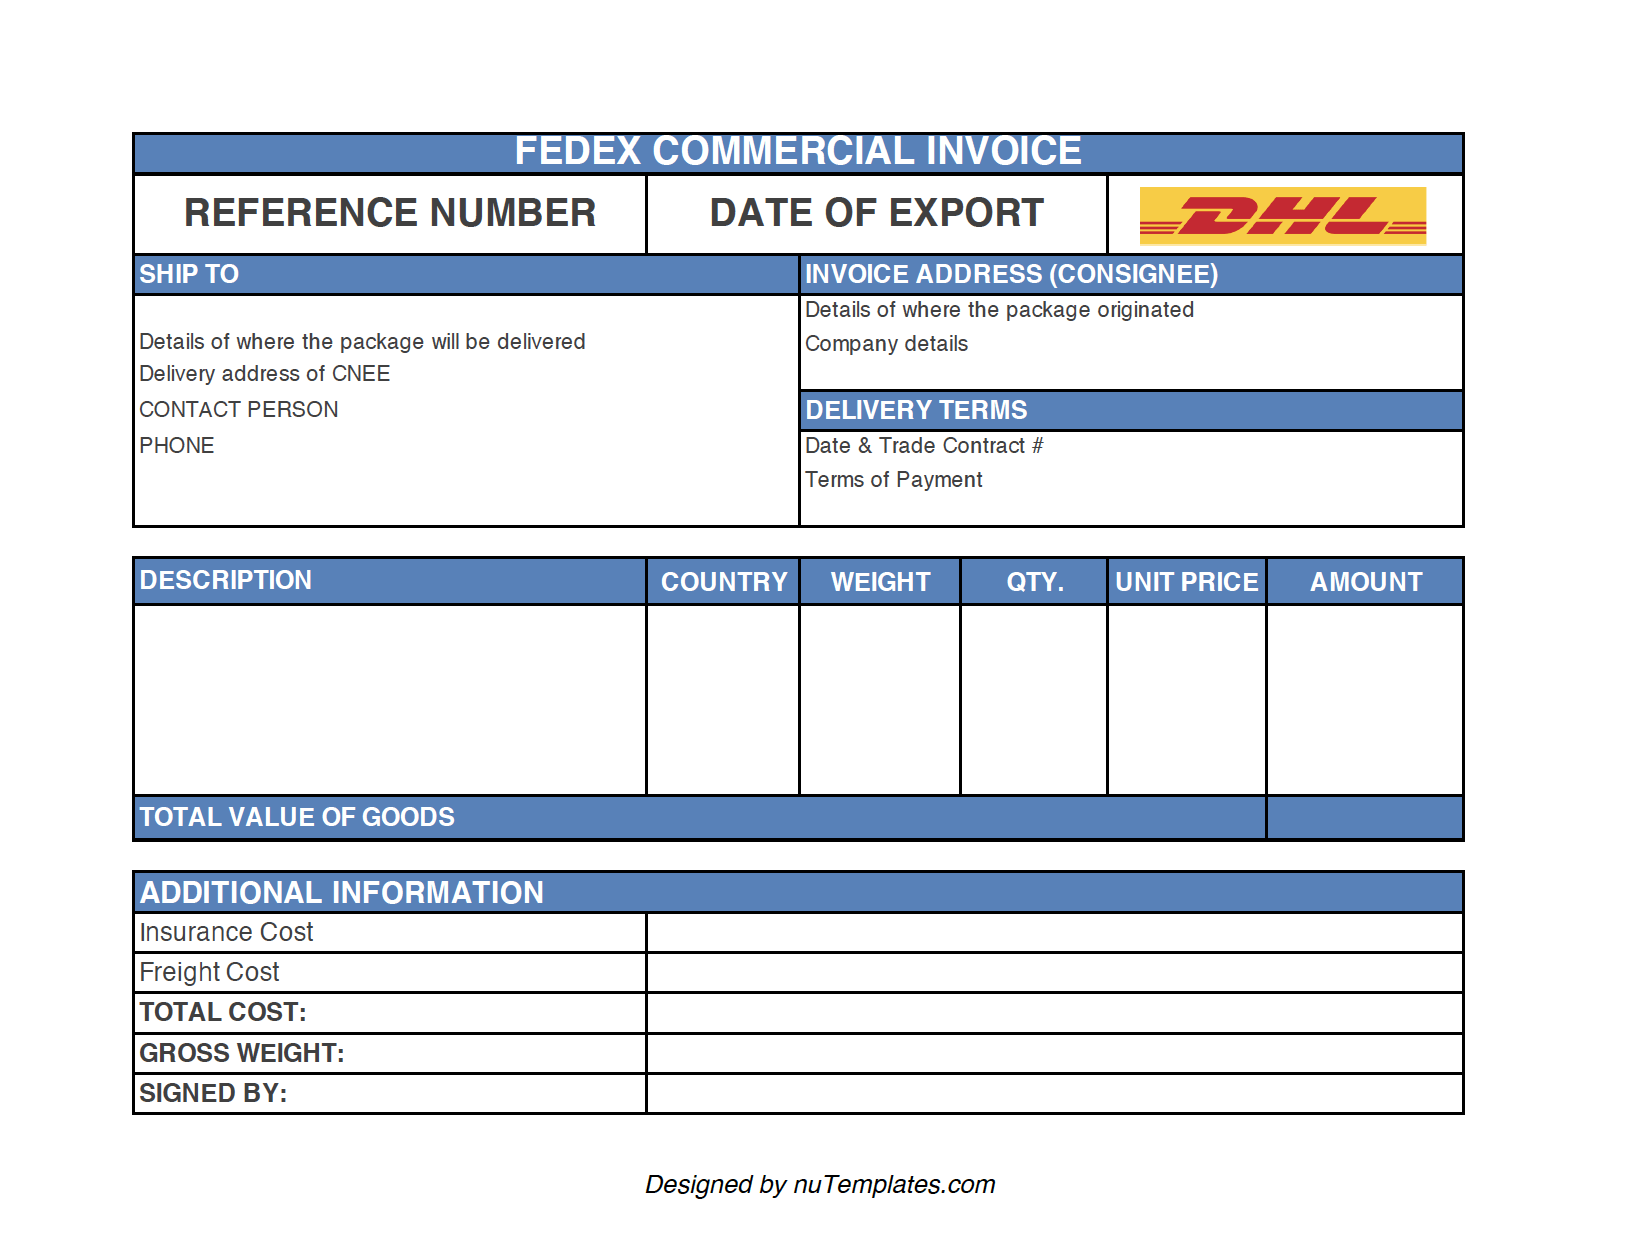 dhl-commercial-invoice-template-dhl-invoices-nutemplates